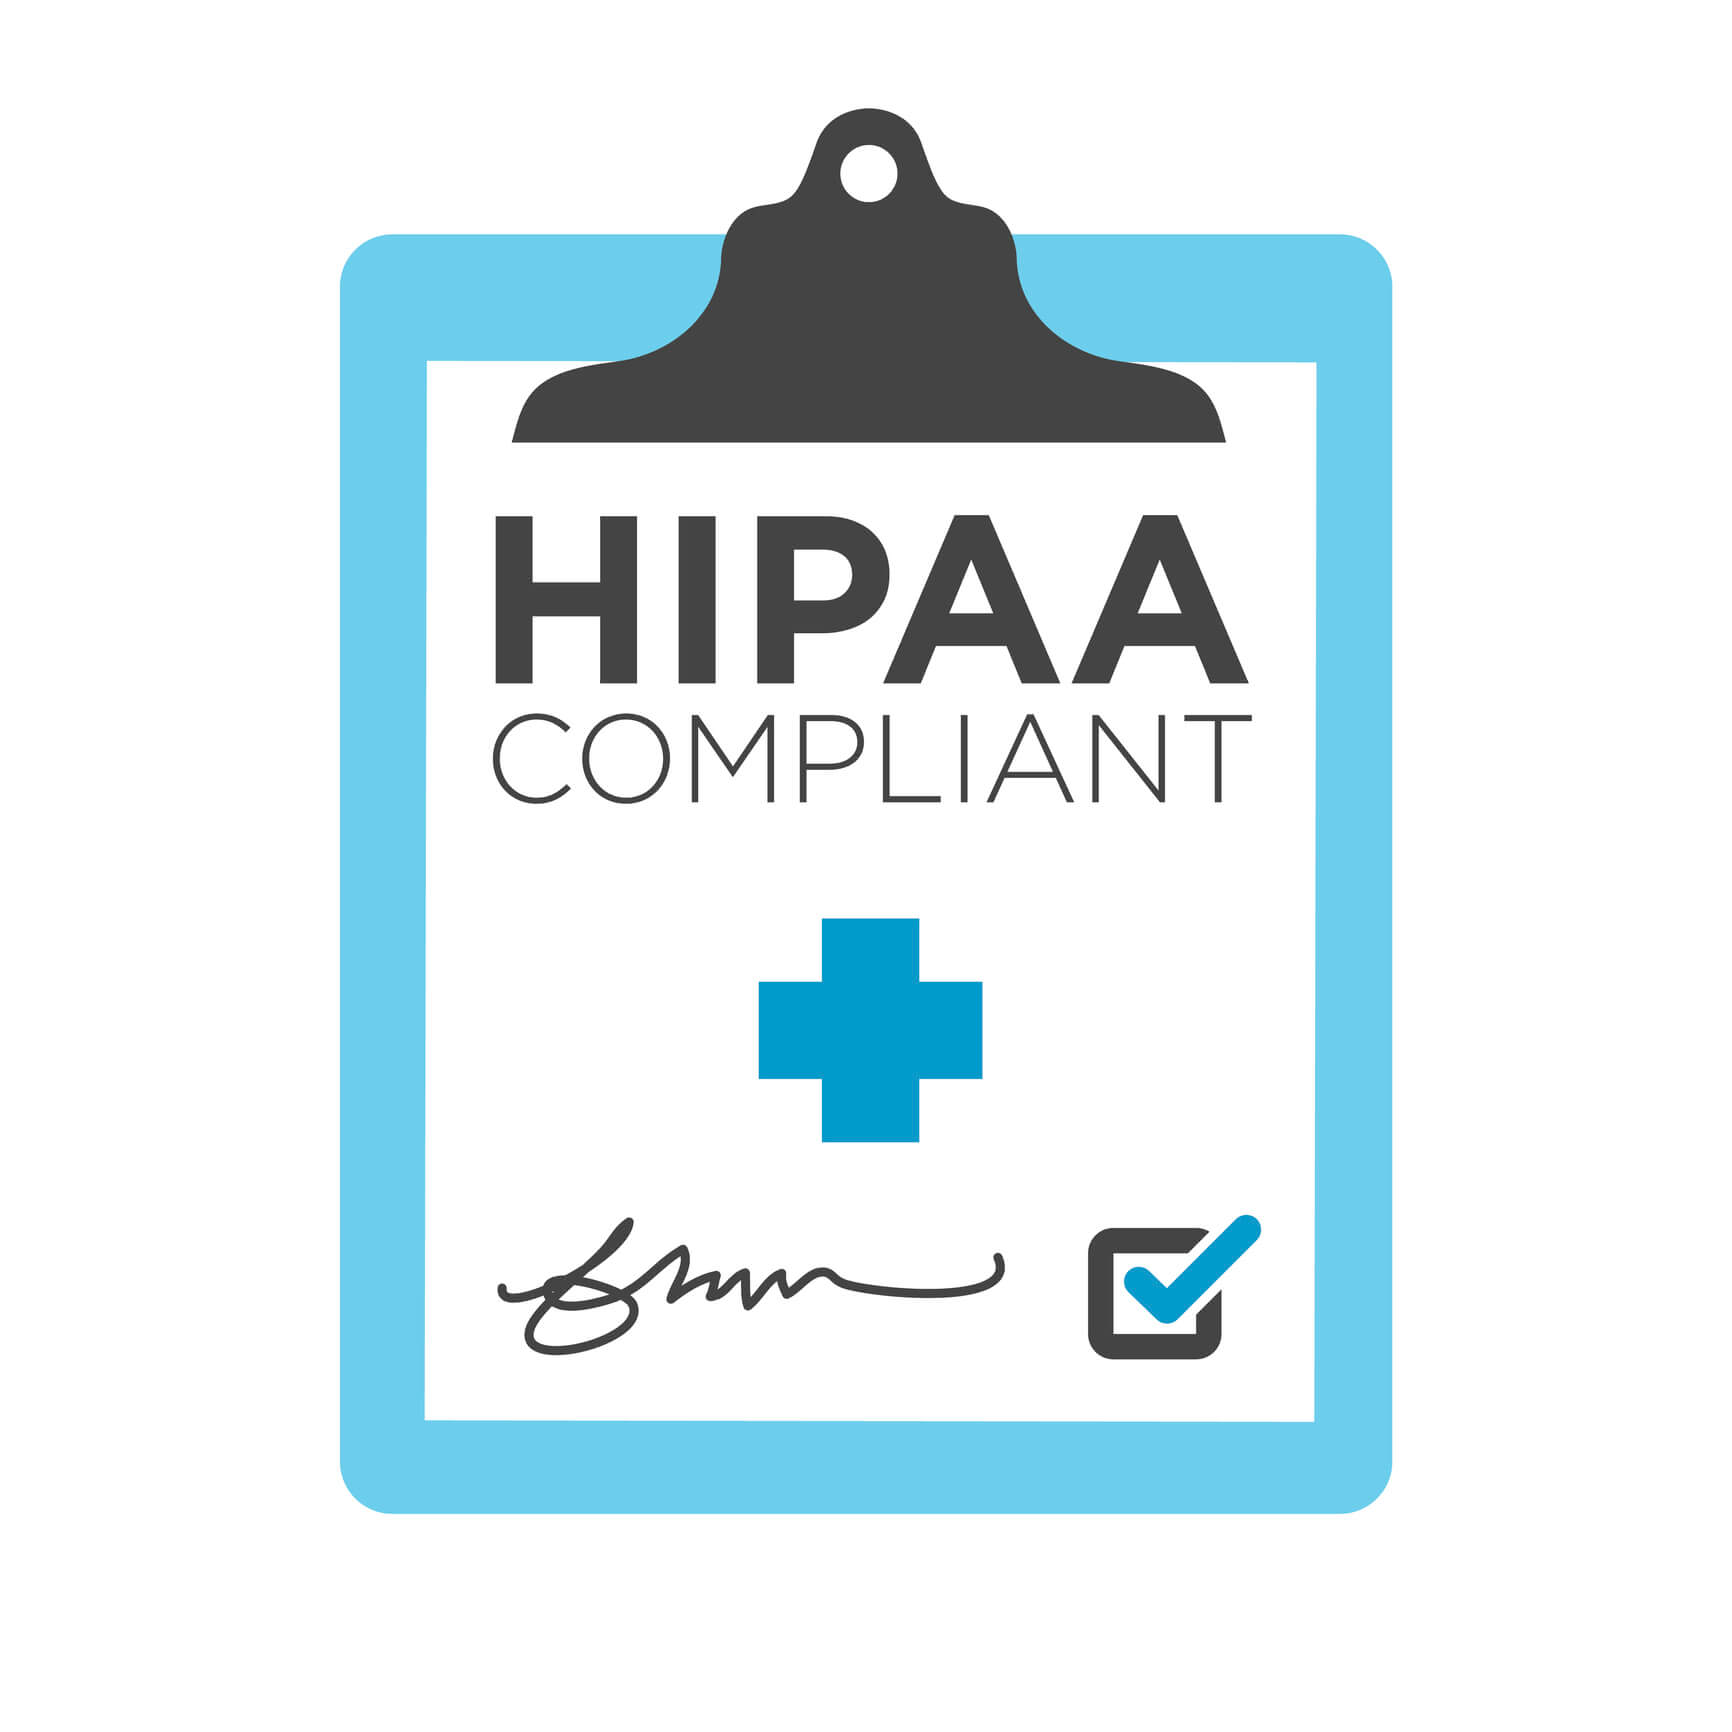 do.you have to use a shred company to be hippa compliant